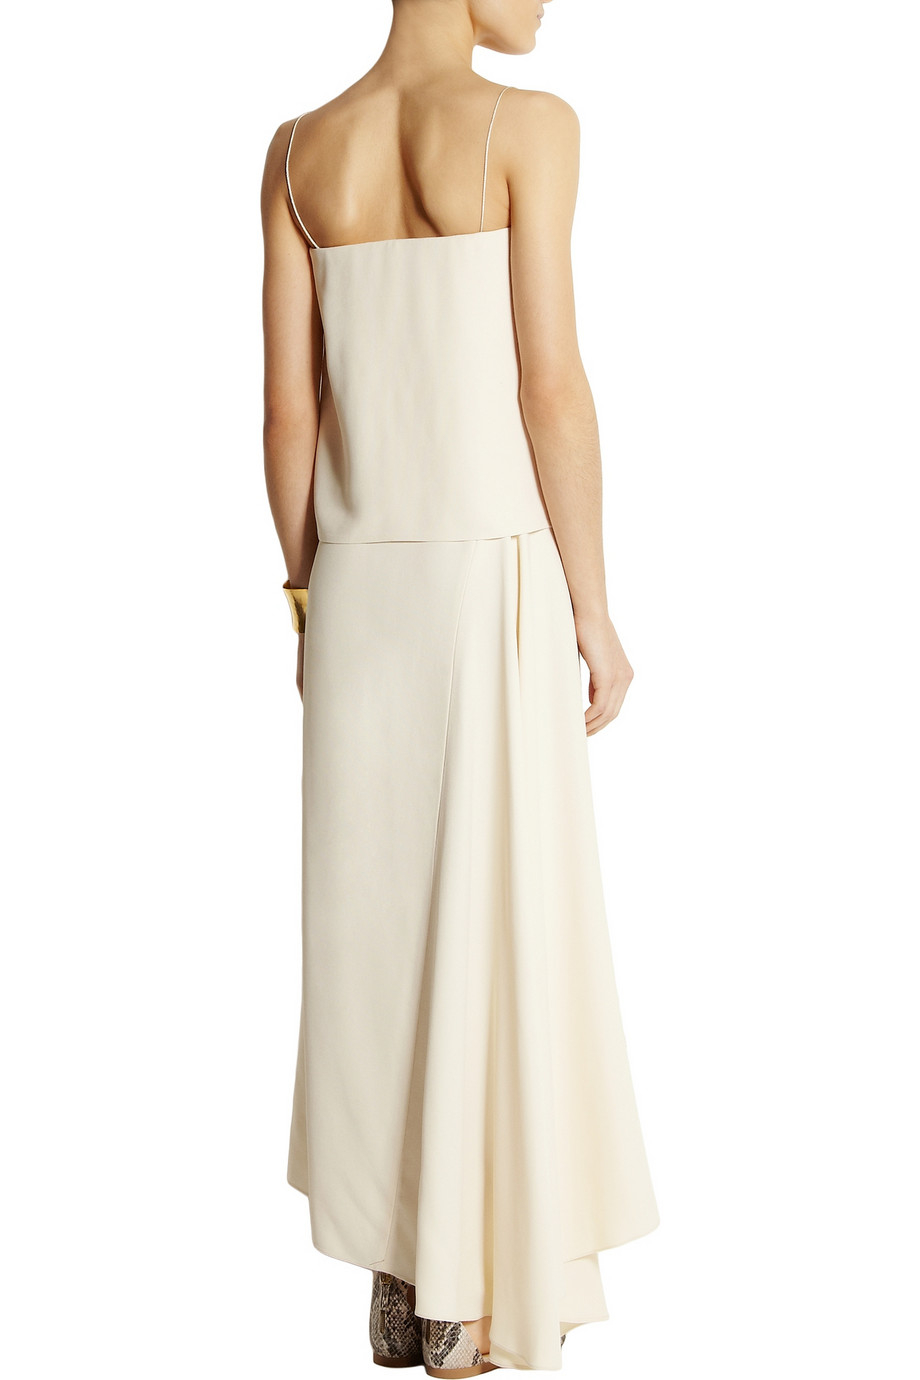 The Row Barnabe Layered Crepe Dress in Cream (Natural) - Lyst